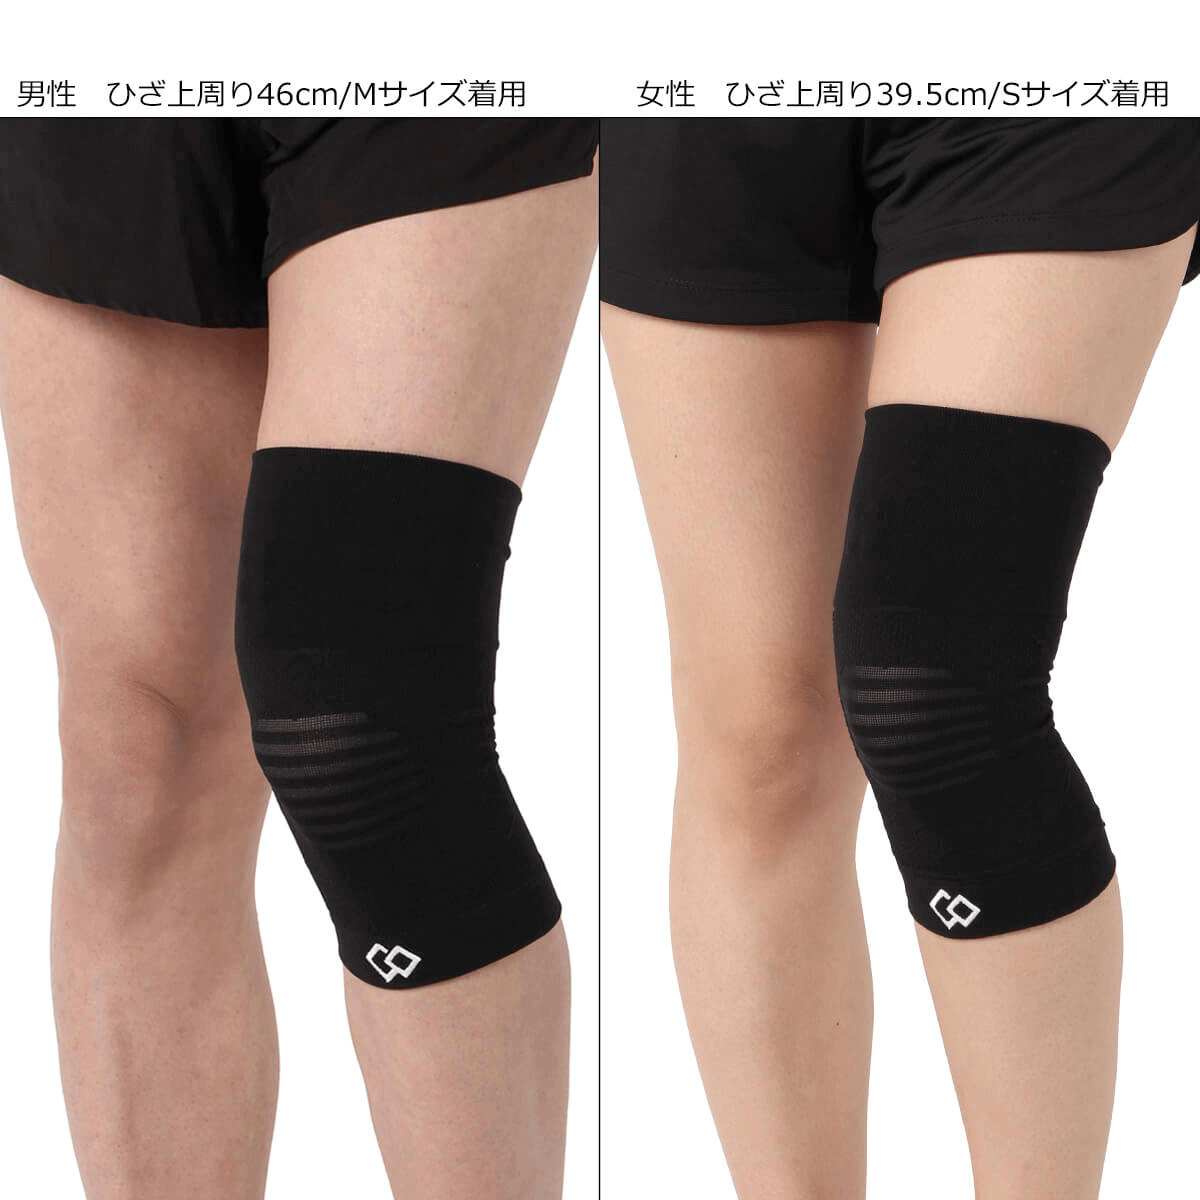 MAG Knee Supporter ABBGC - imy Shop Japan